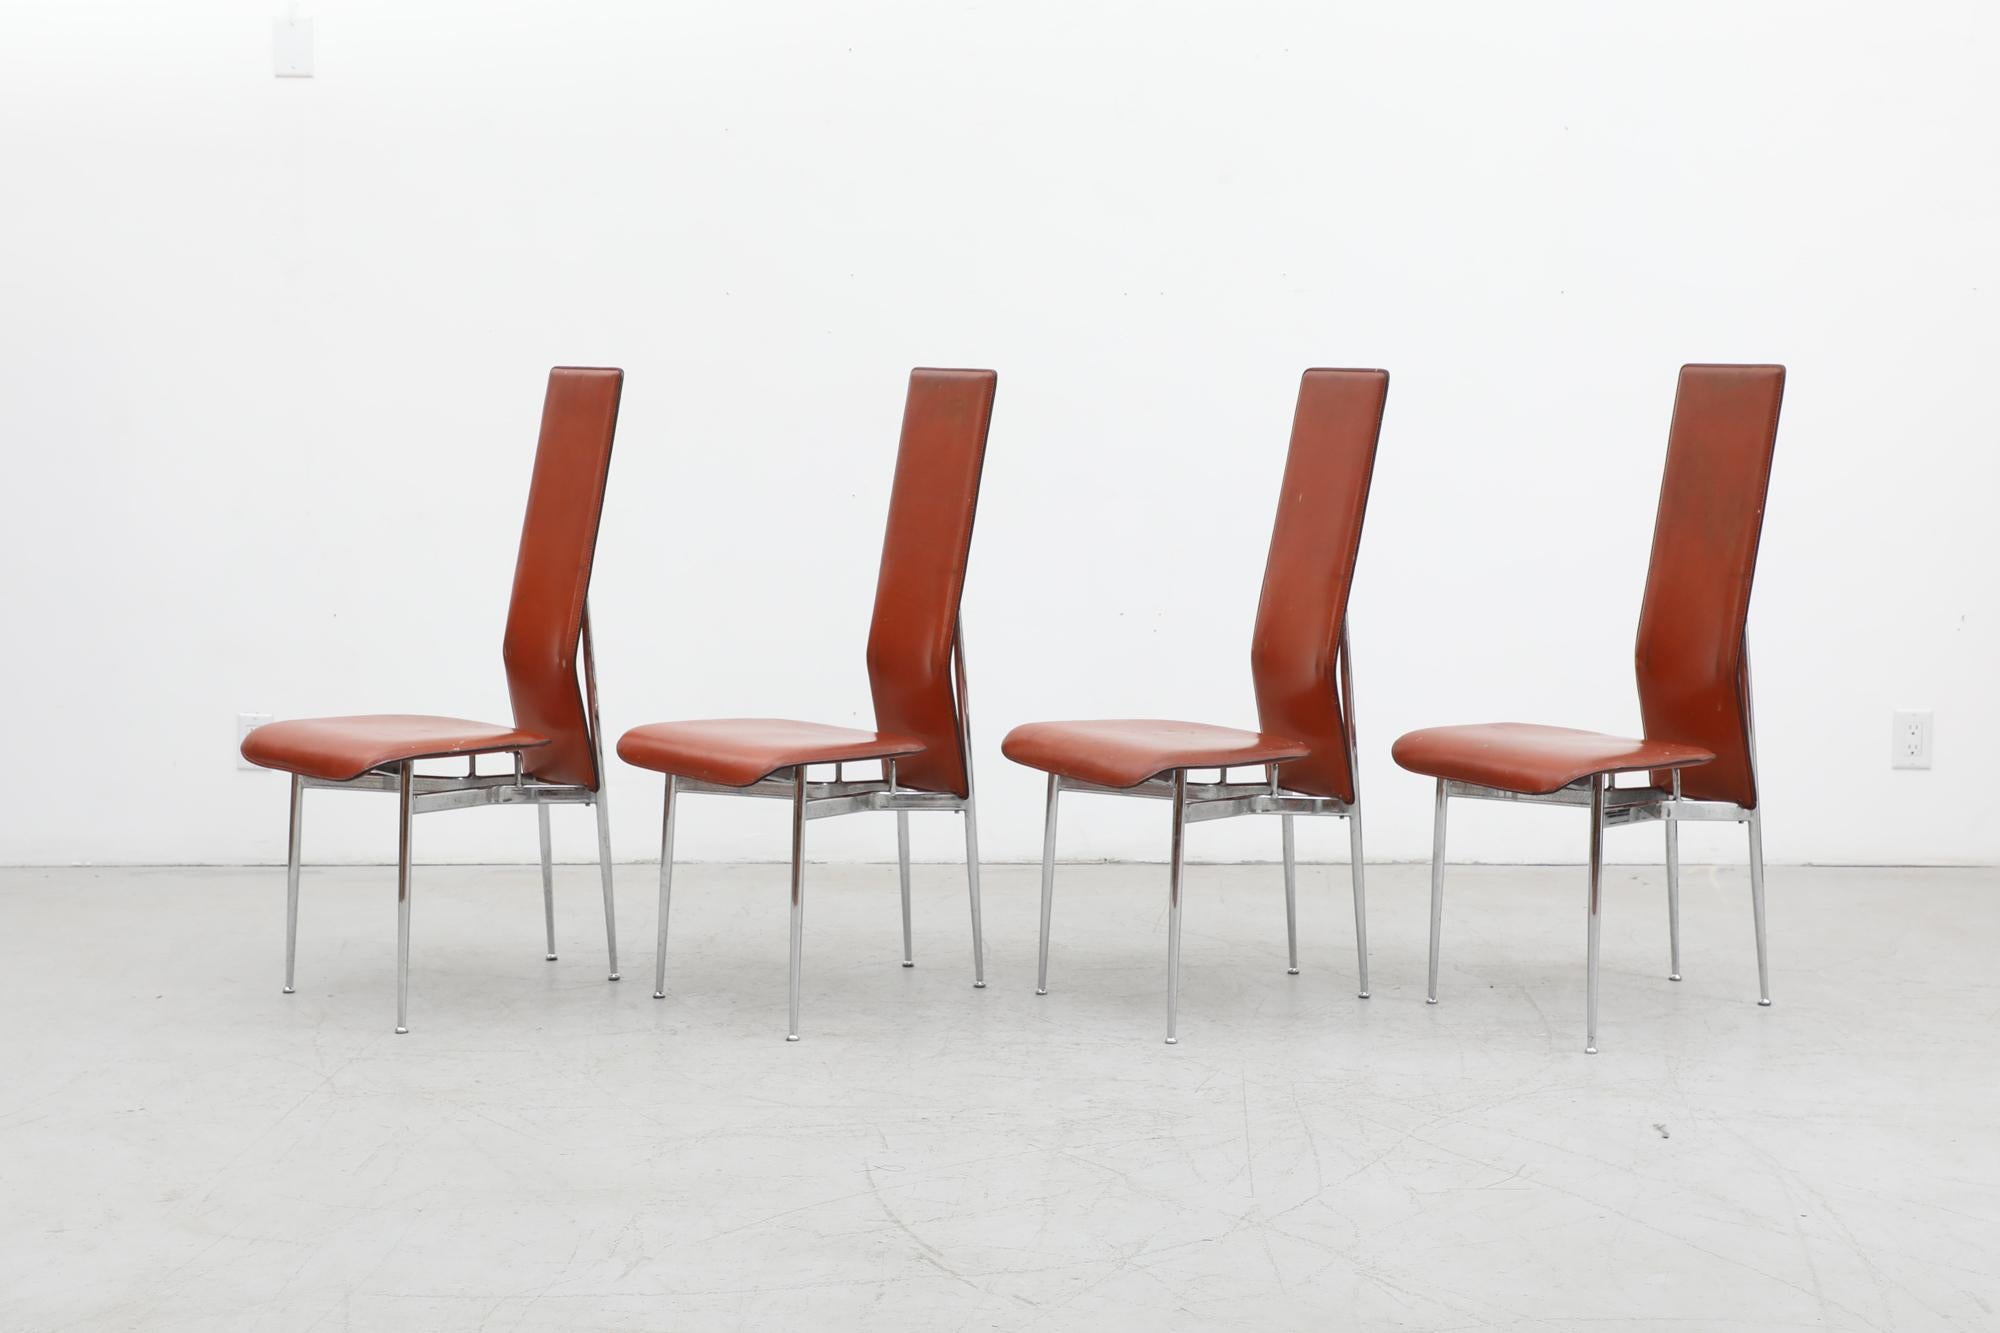 Set of 4 'S44' Chairs by Giancarlo Vegni & Gianfranco Gualtierotti for Fasem, 1980's. These chairs have cognac leather seats with chrome frames and are in original condition with visible wear. Some pitting and discoloration to the chrome and patina